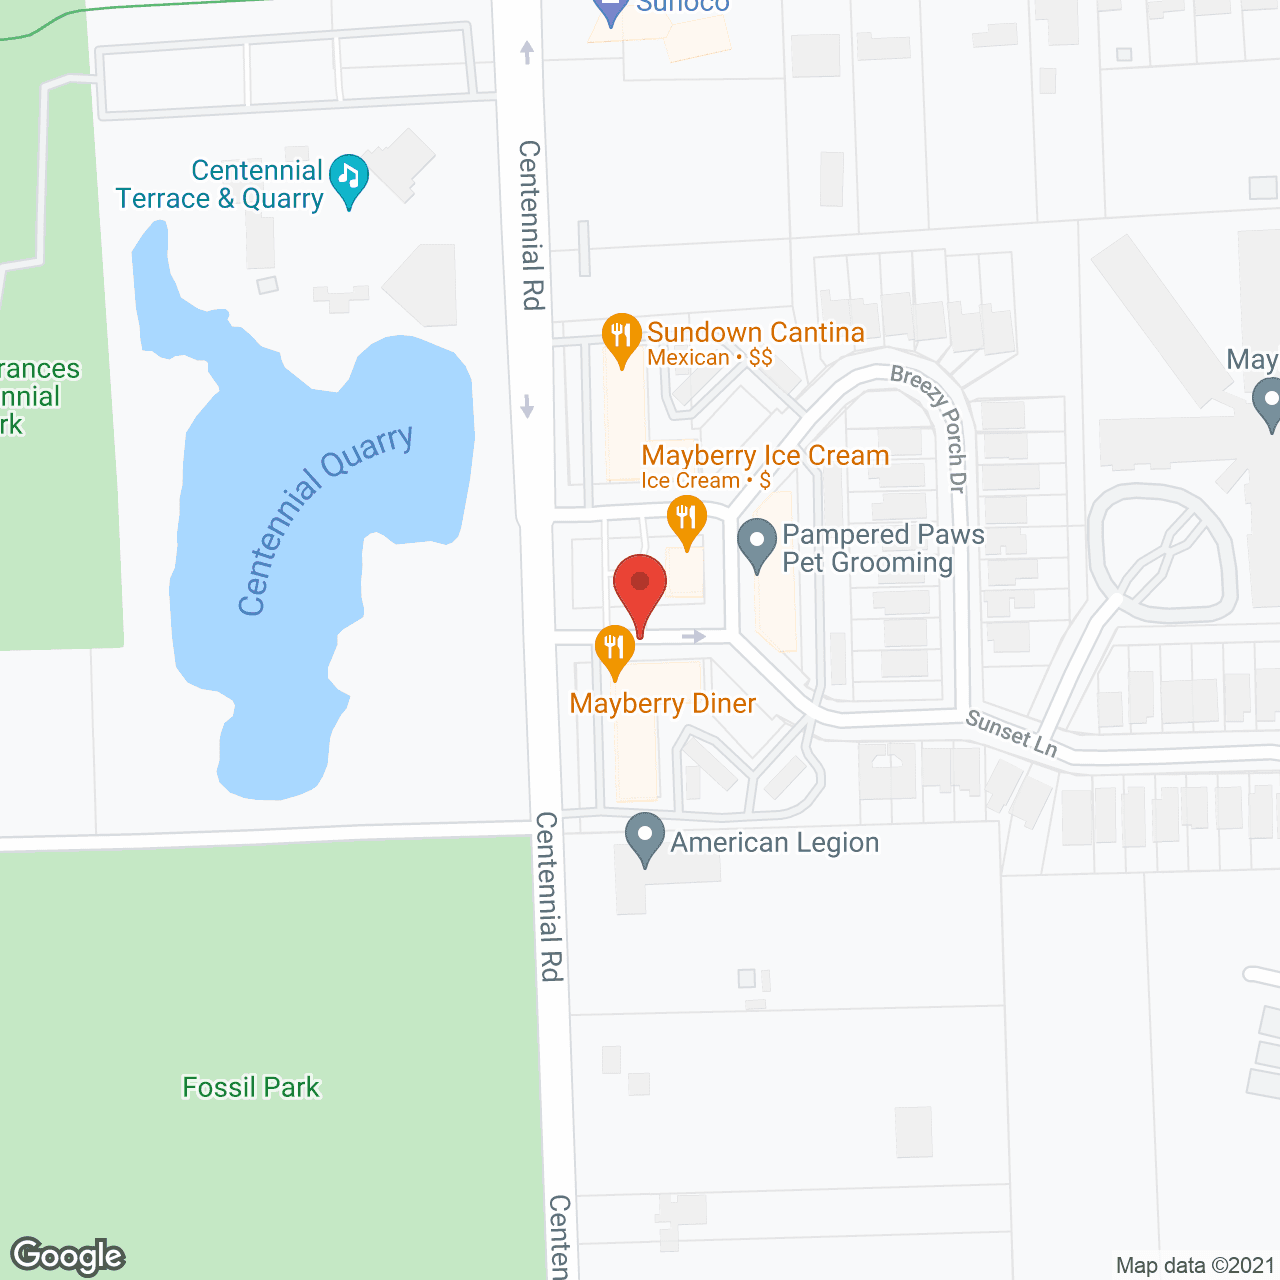 Friends of the Family Home Health Care - Sylvania, OH in google map